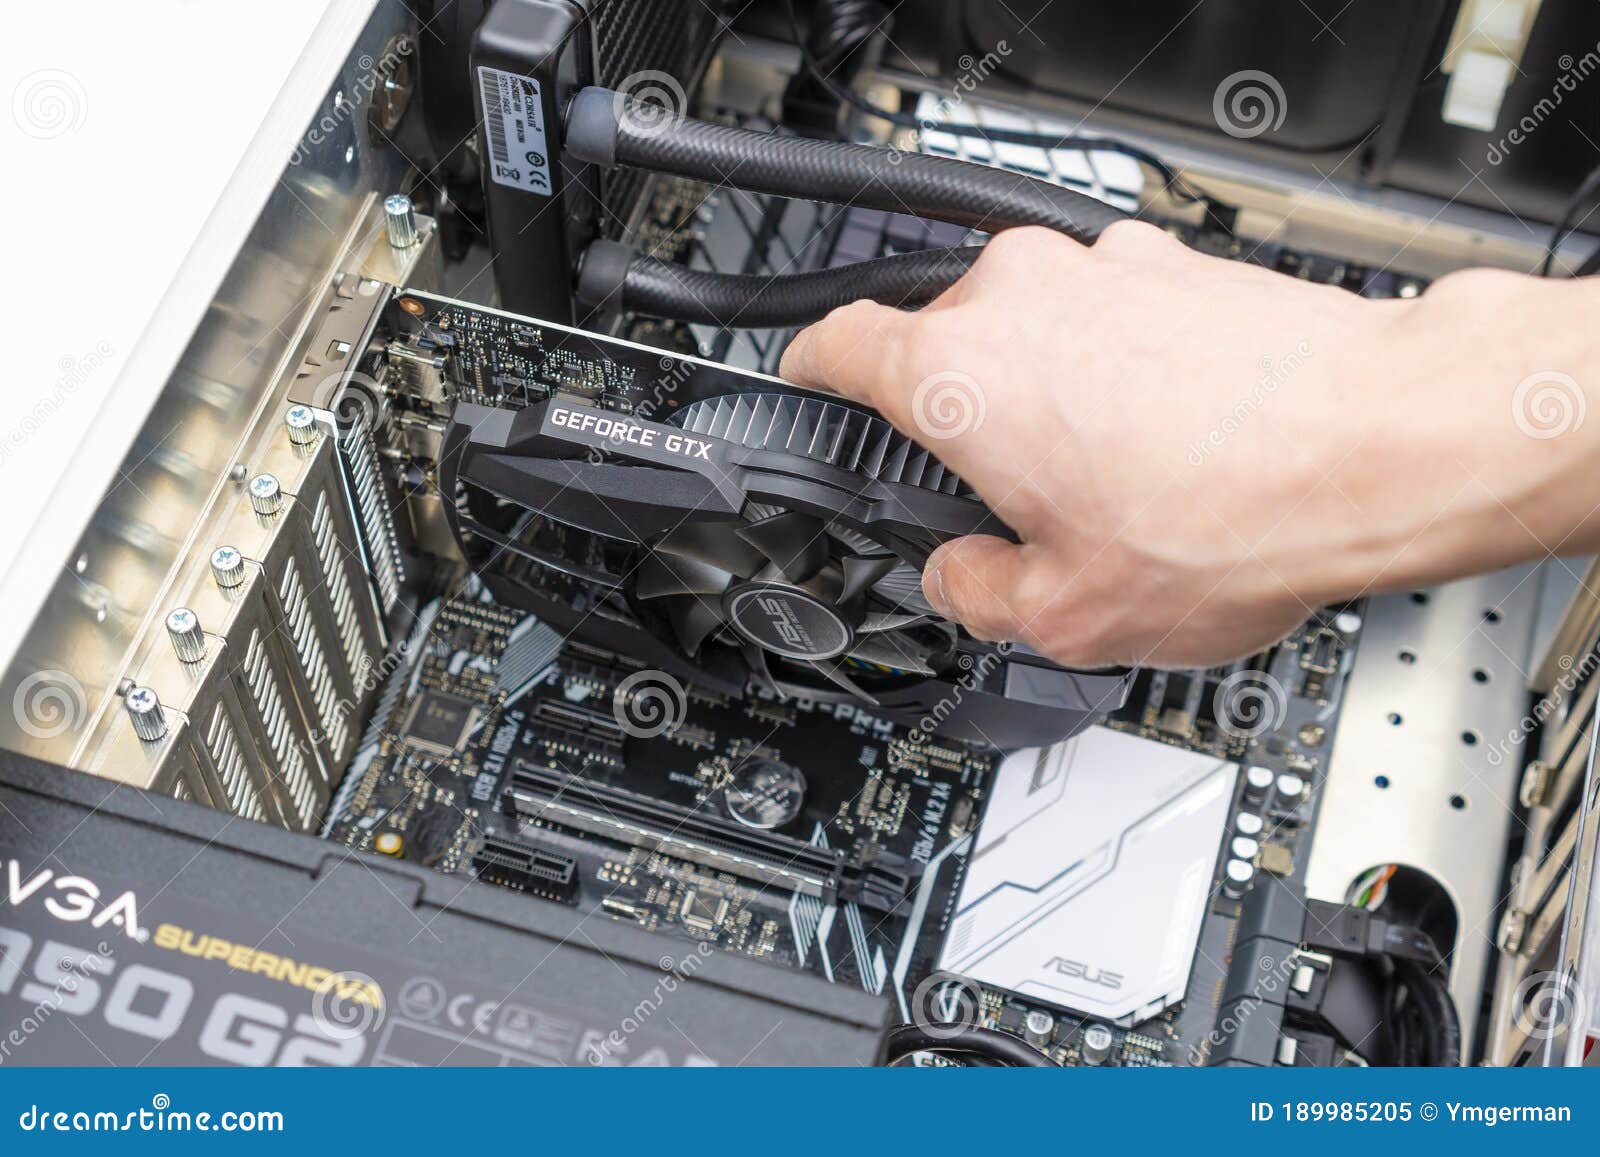 how to install graphic card in pc